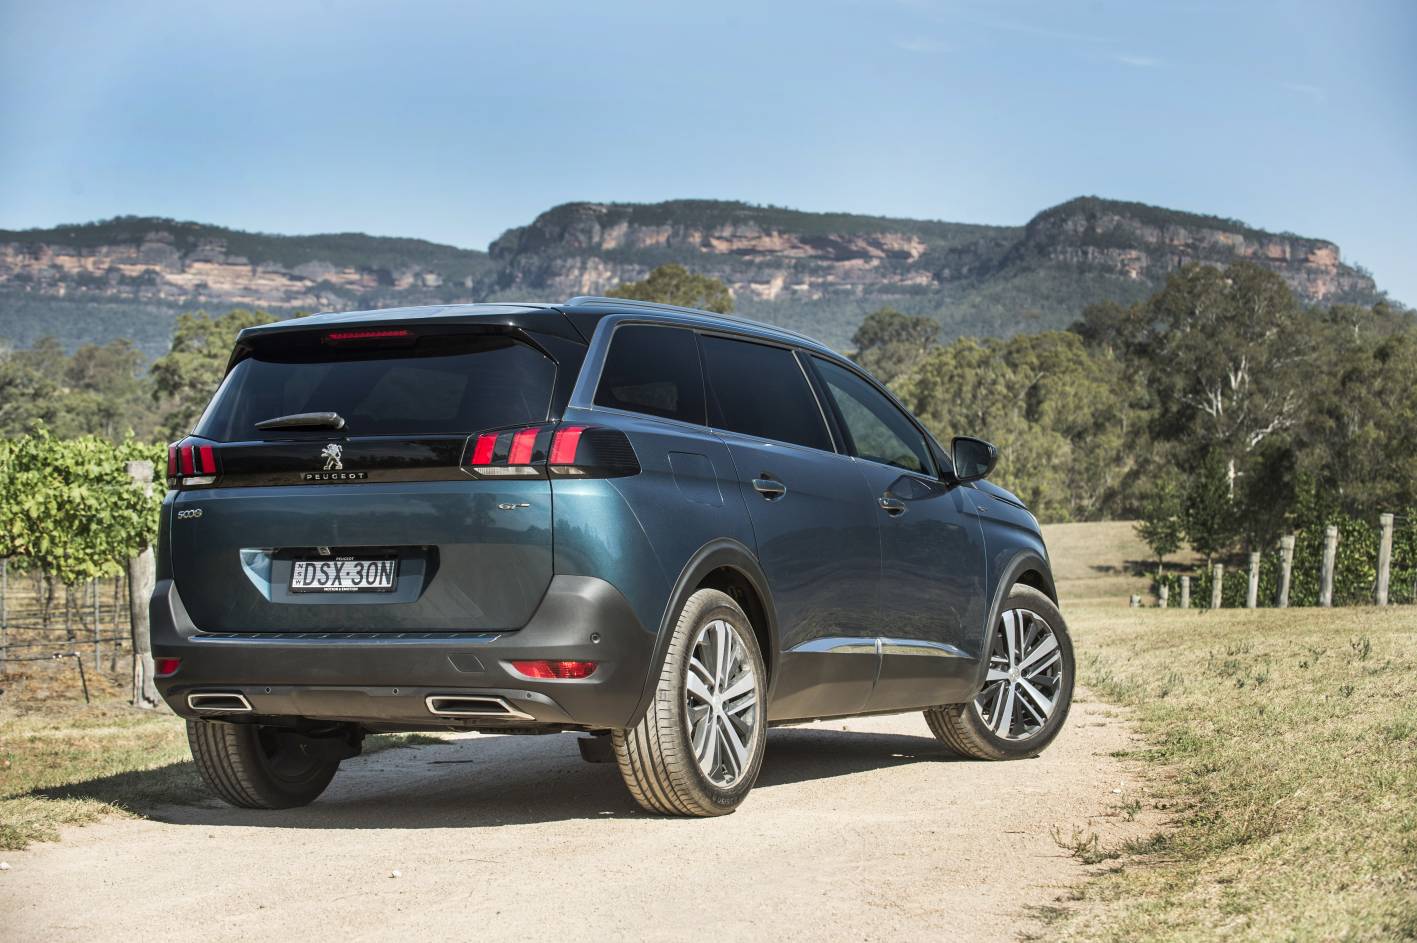 Peugeot 5008 7-seater SUV promises benchmark space and versatility - ForceGT.com1417 x 943